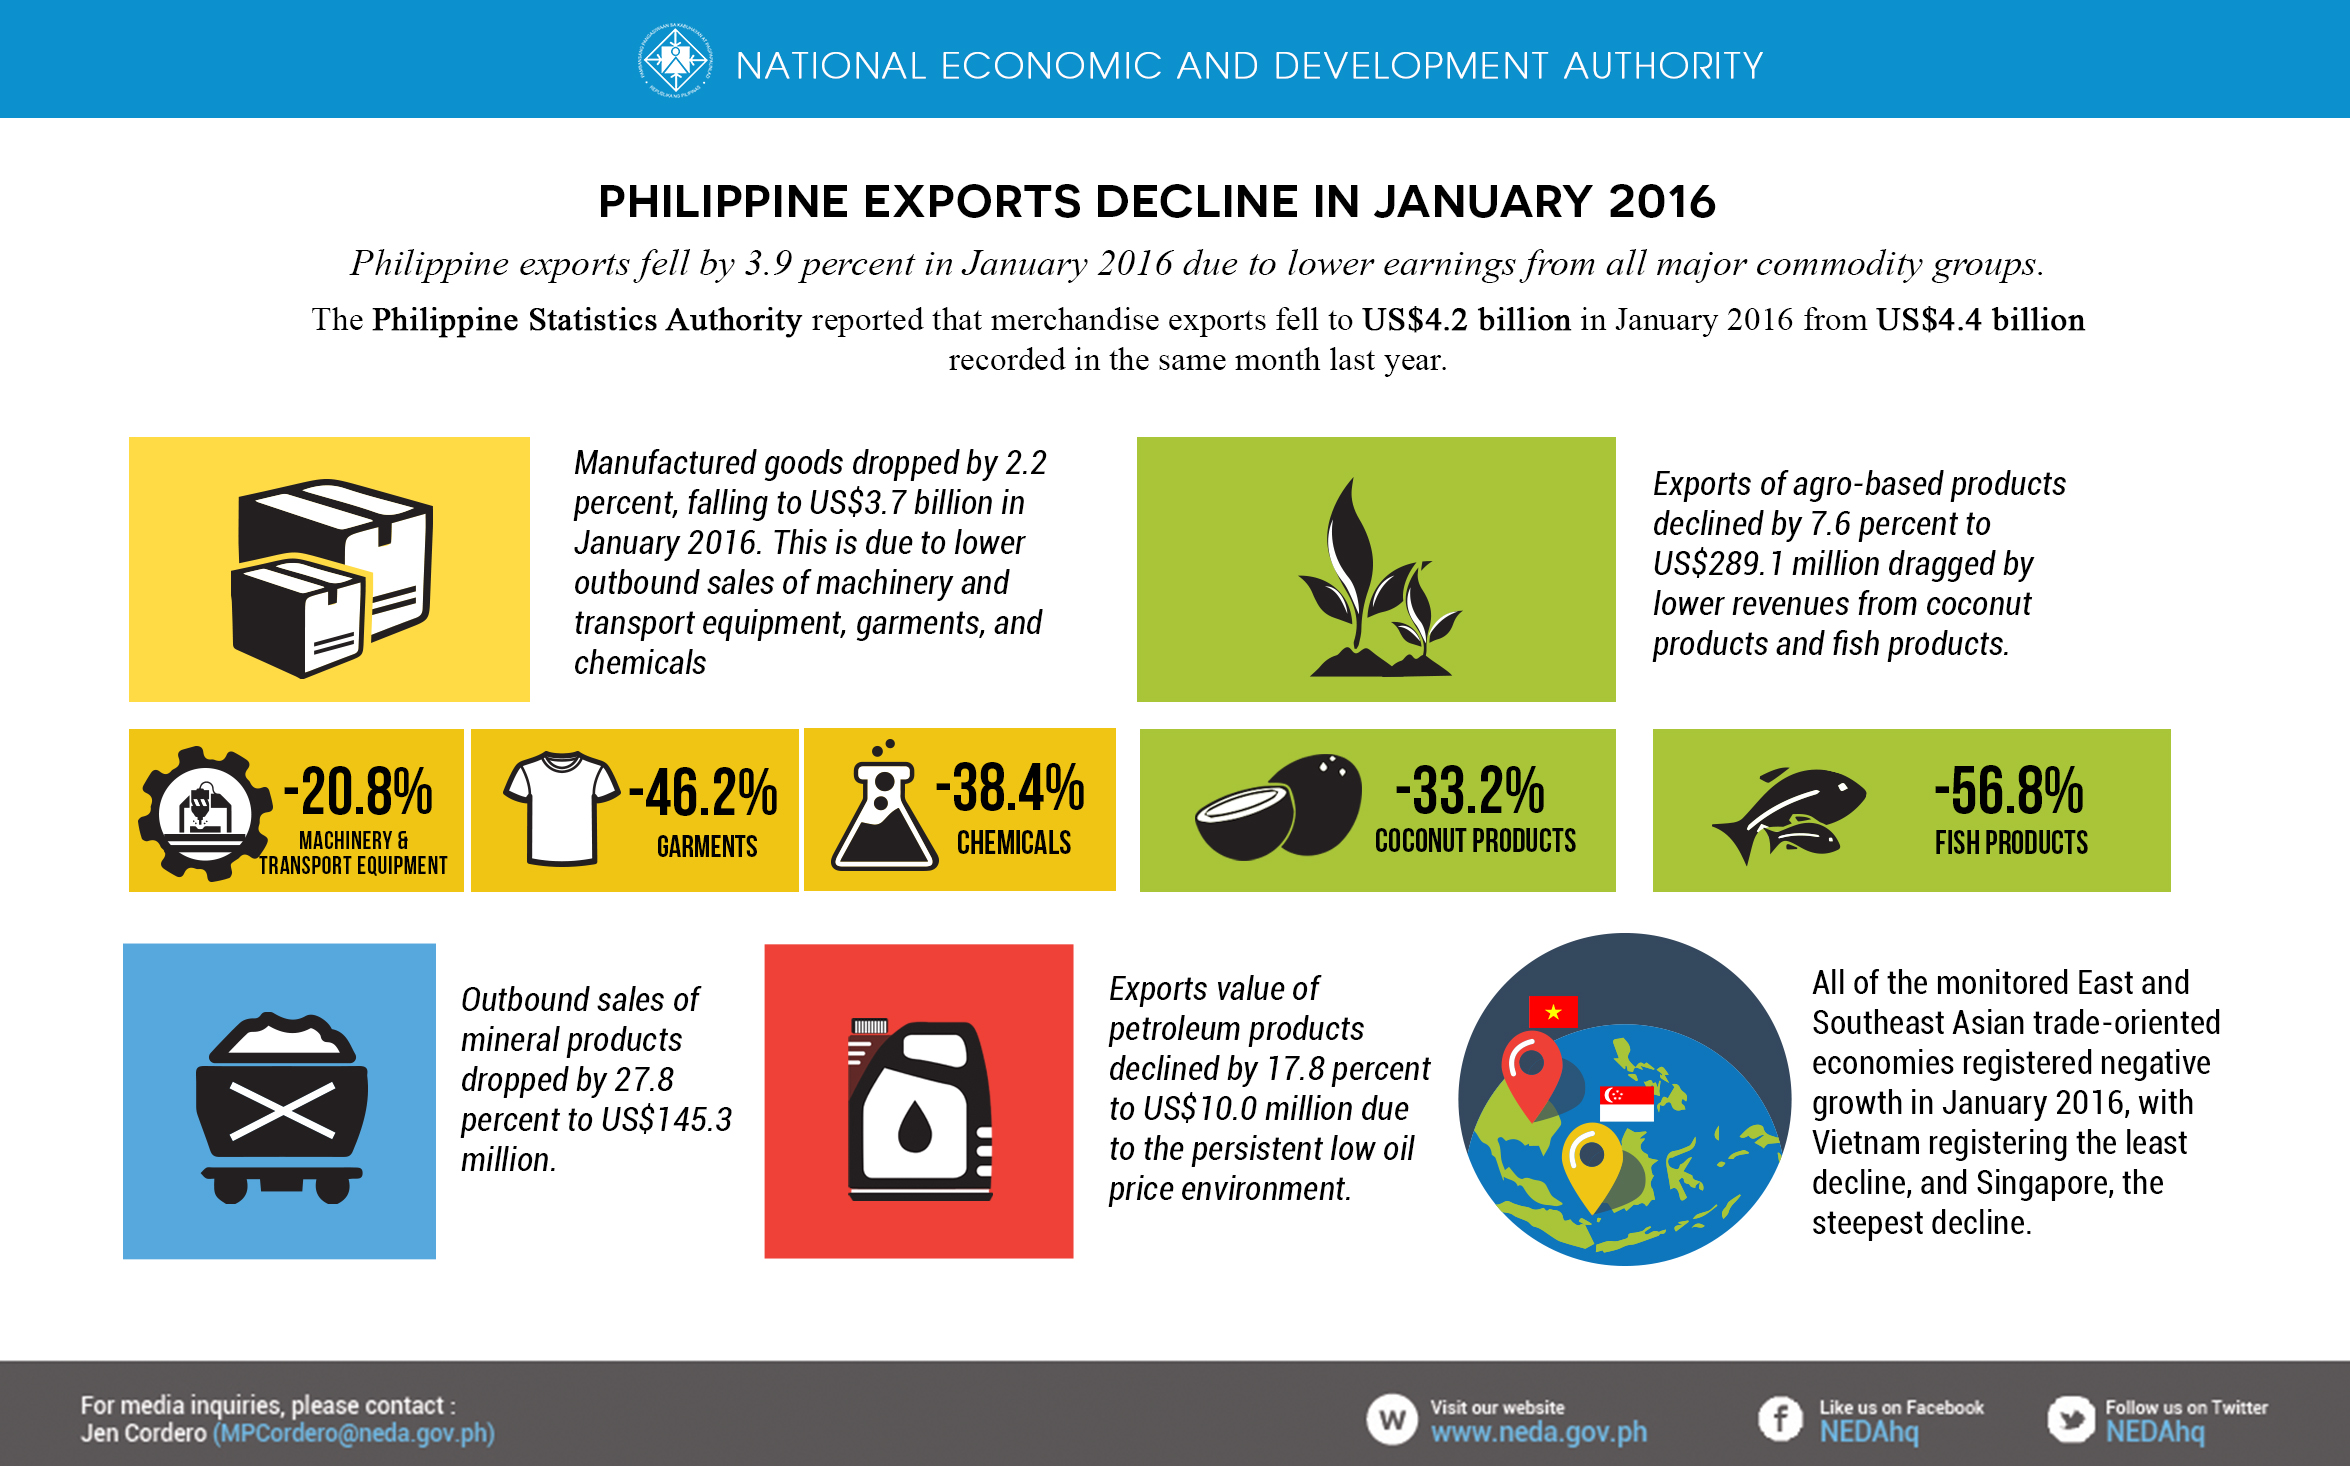 PH exports fall by 3.9 in January 2016